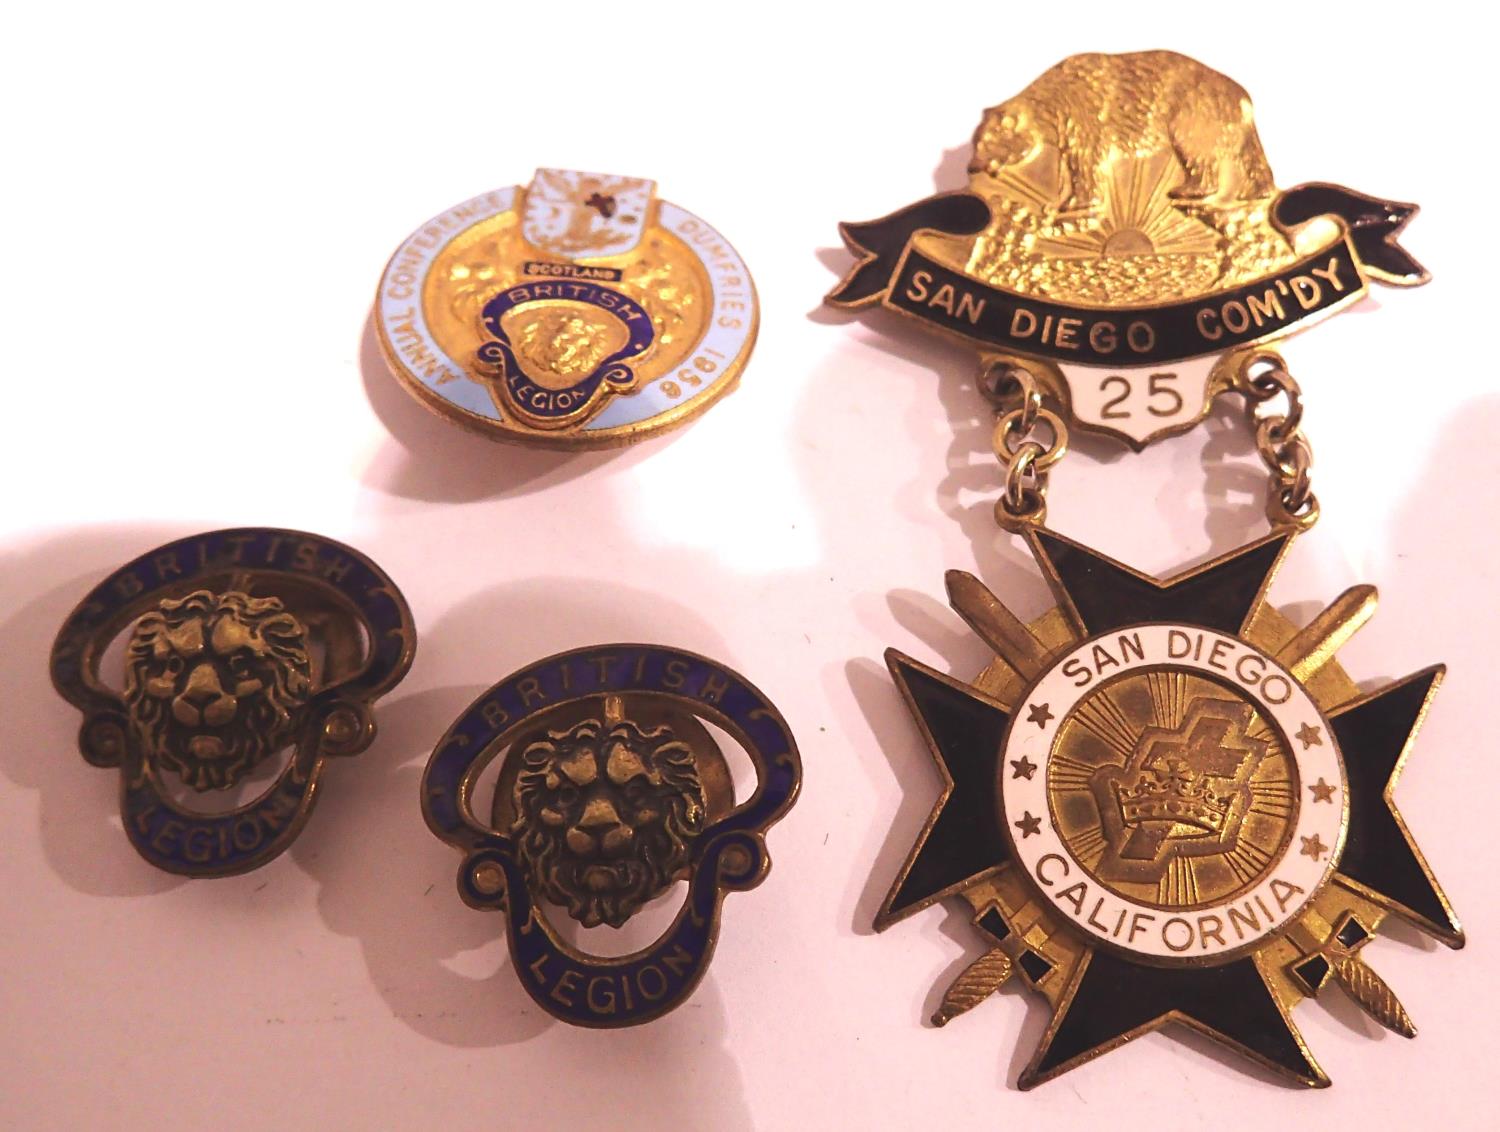 Three enamelled British Legion lapel badges, with a Californian fraternity badge (4). P&P Group